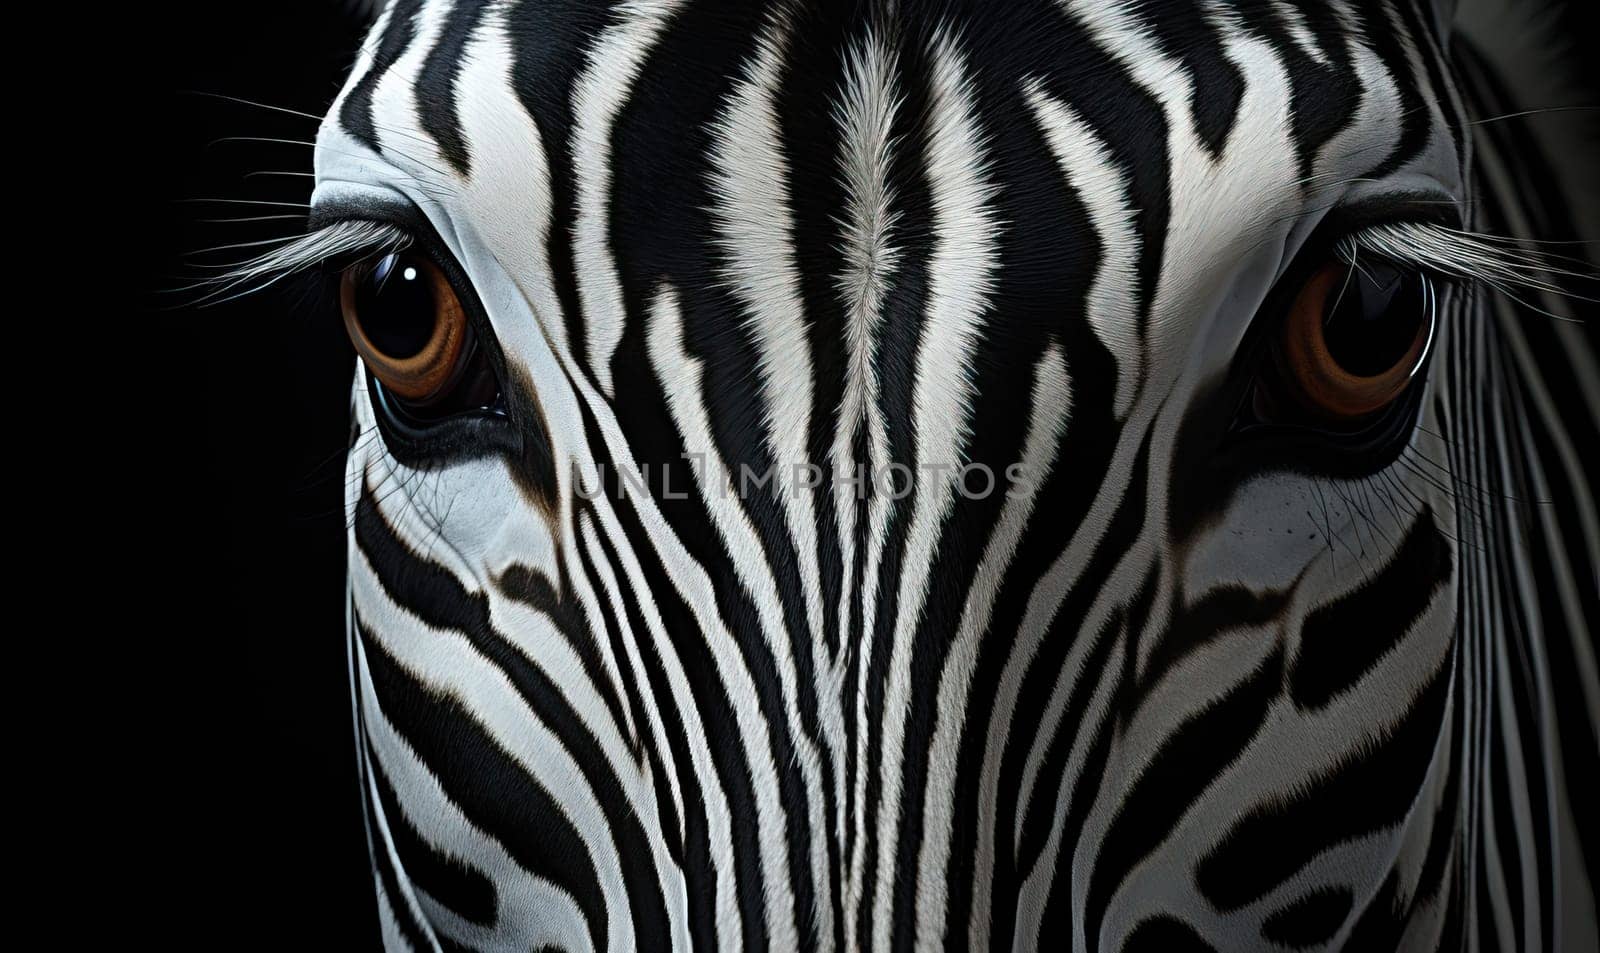 Image of a zebra's face on a black background. Selective soft focus